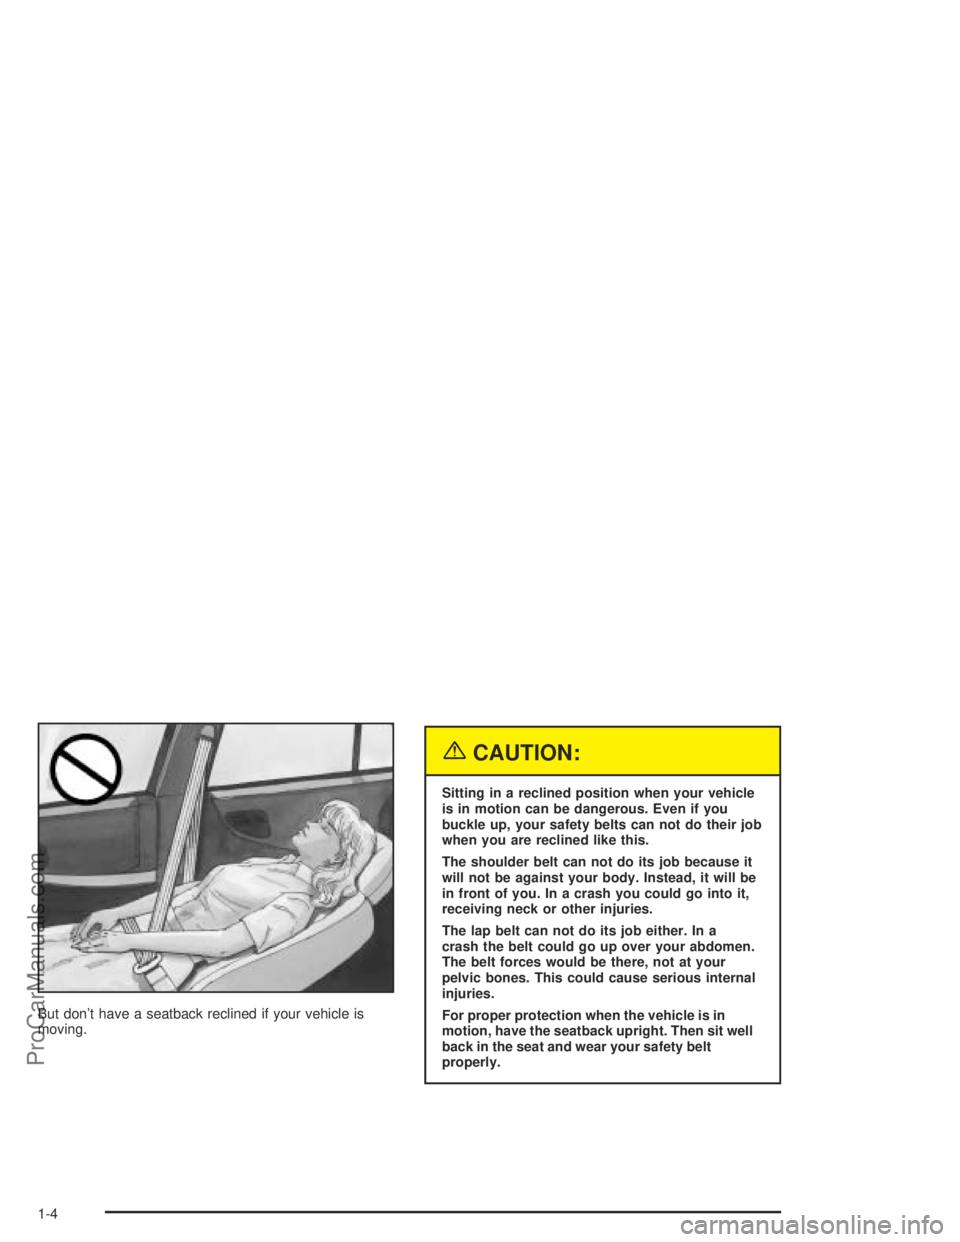 SATURN ION 2004  Owners Manual But don’t have a seatback reclined if your vehicle is
moving.
{CAUTION:
Sitting in a reclined position when your vehicle
is in motion can be dangerous. Even if you
buckle up, your safety belts can n